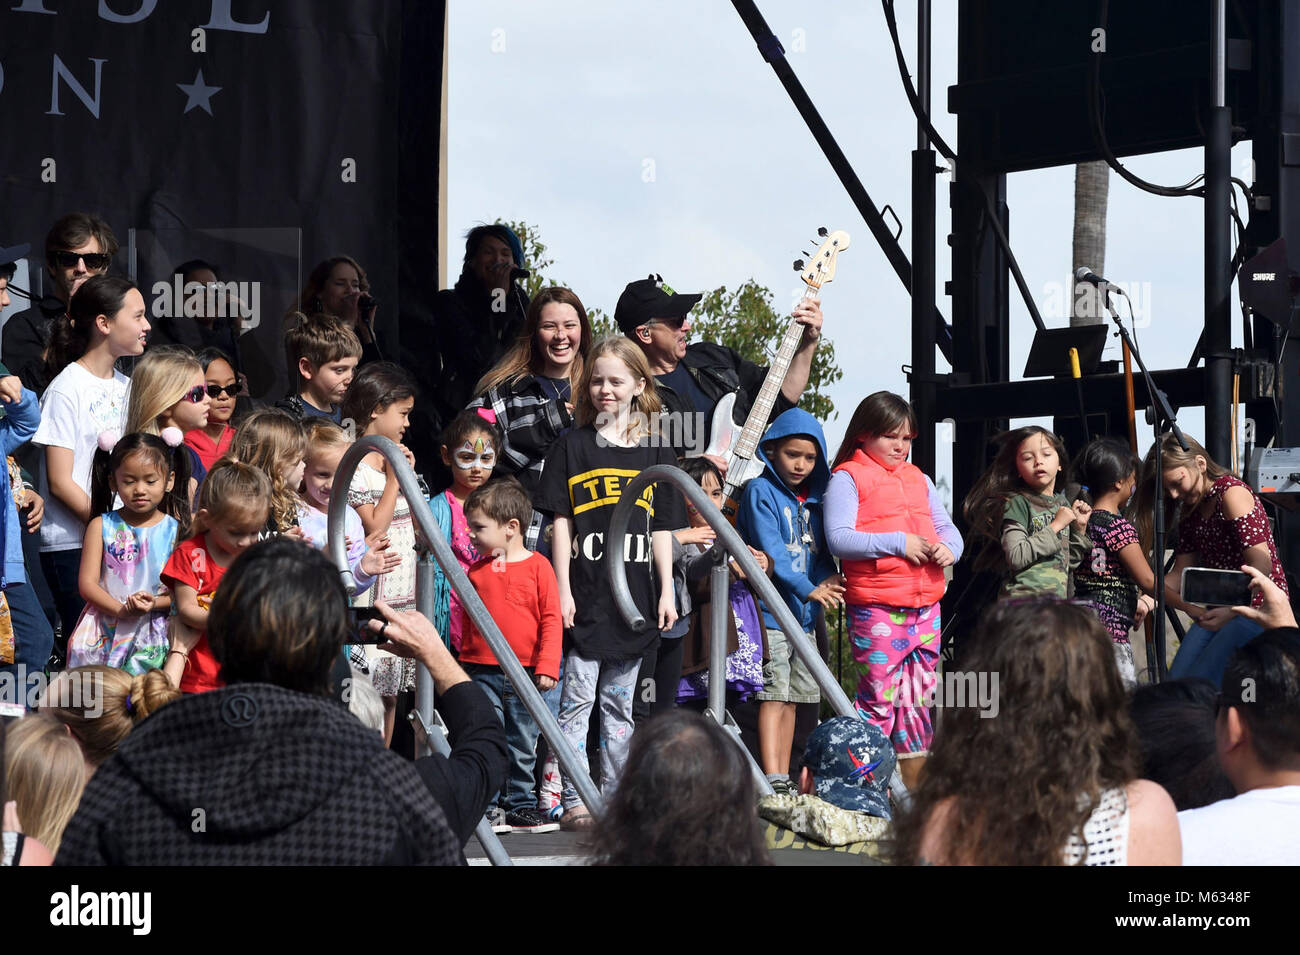 SAN DIEGO (Feb. 10, 2018) Actor, musician, and humanitarian Gary Sinise (center) and the Lt. Dan Band perform while surrounded by kids on stage at Naval Medical Center San Diego (NMCSD) during their sixth annual Invincible Spirit Festival. The festival included a three-hour concert by the band included activities for children, a rock-climbing wall, food cooked by Team Irvine, and 149 volunteers who set up and served food at the event. Gary Sinise and Lt. Dan Band debuted their first military concert at NMCSD in 2012. (U.S. Navy Stock Photo